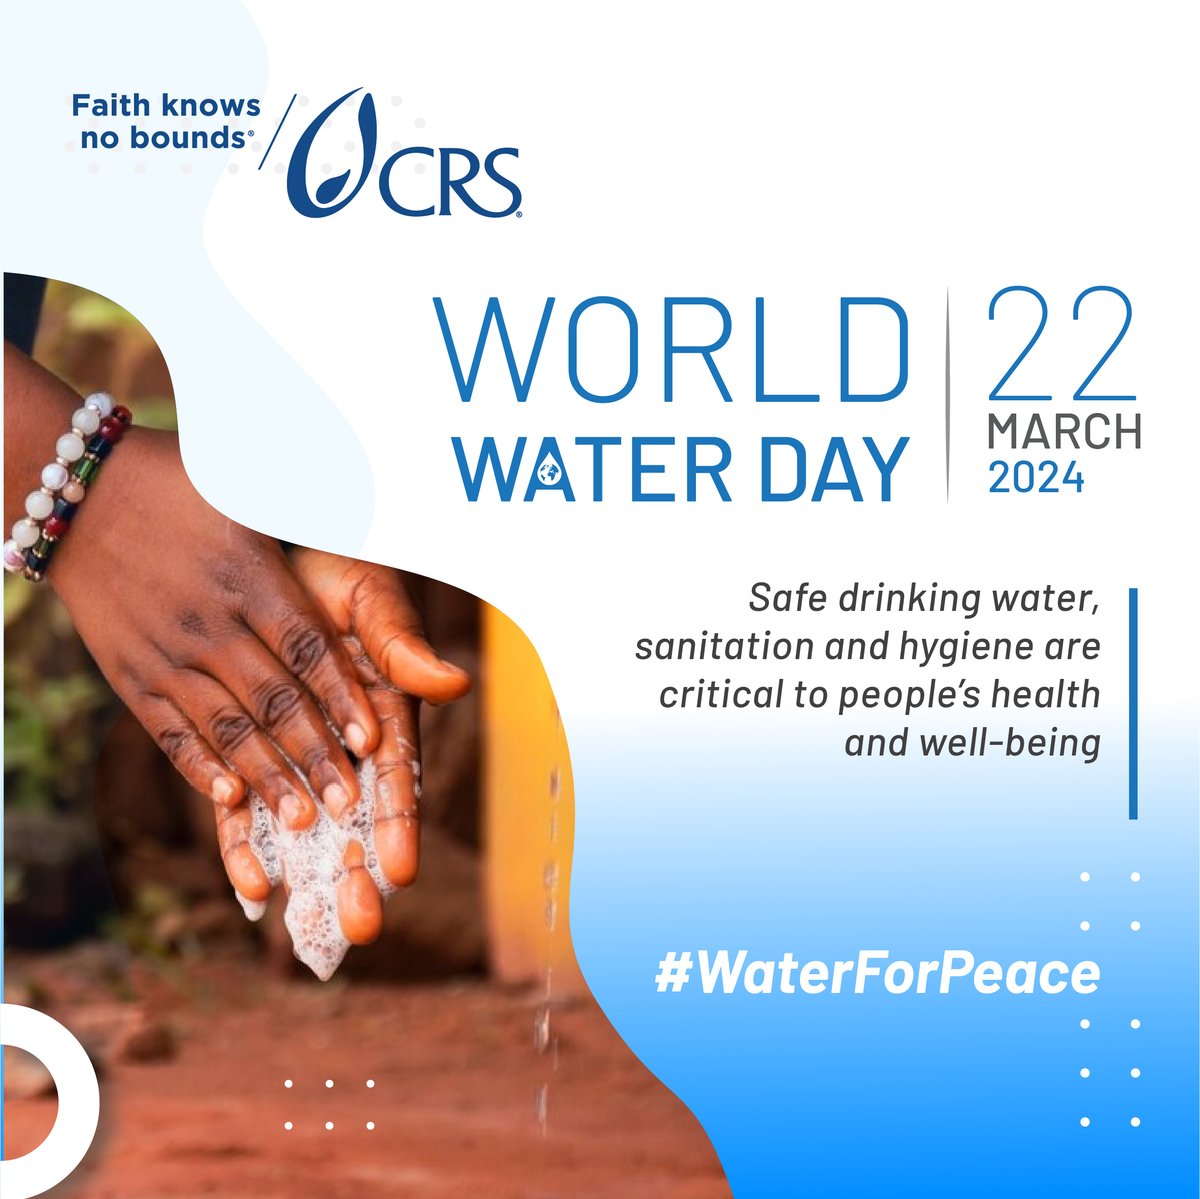 Our water and sanitation in healthcare facilities project is providing:
✳️Hand washing and sanitation facilities
✳️Healthcare waste management
✳️Quality water

#WaterForPeace
#WorldWaterDay2024